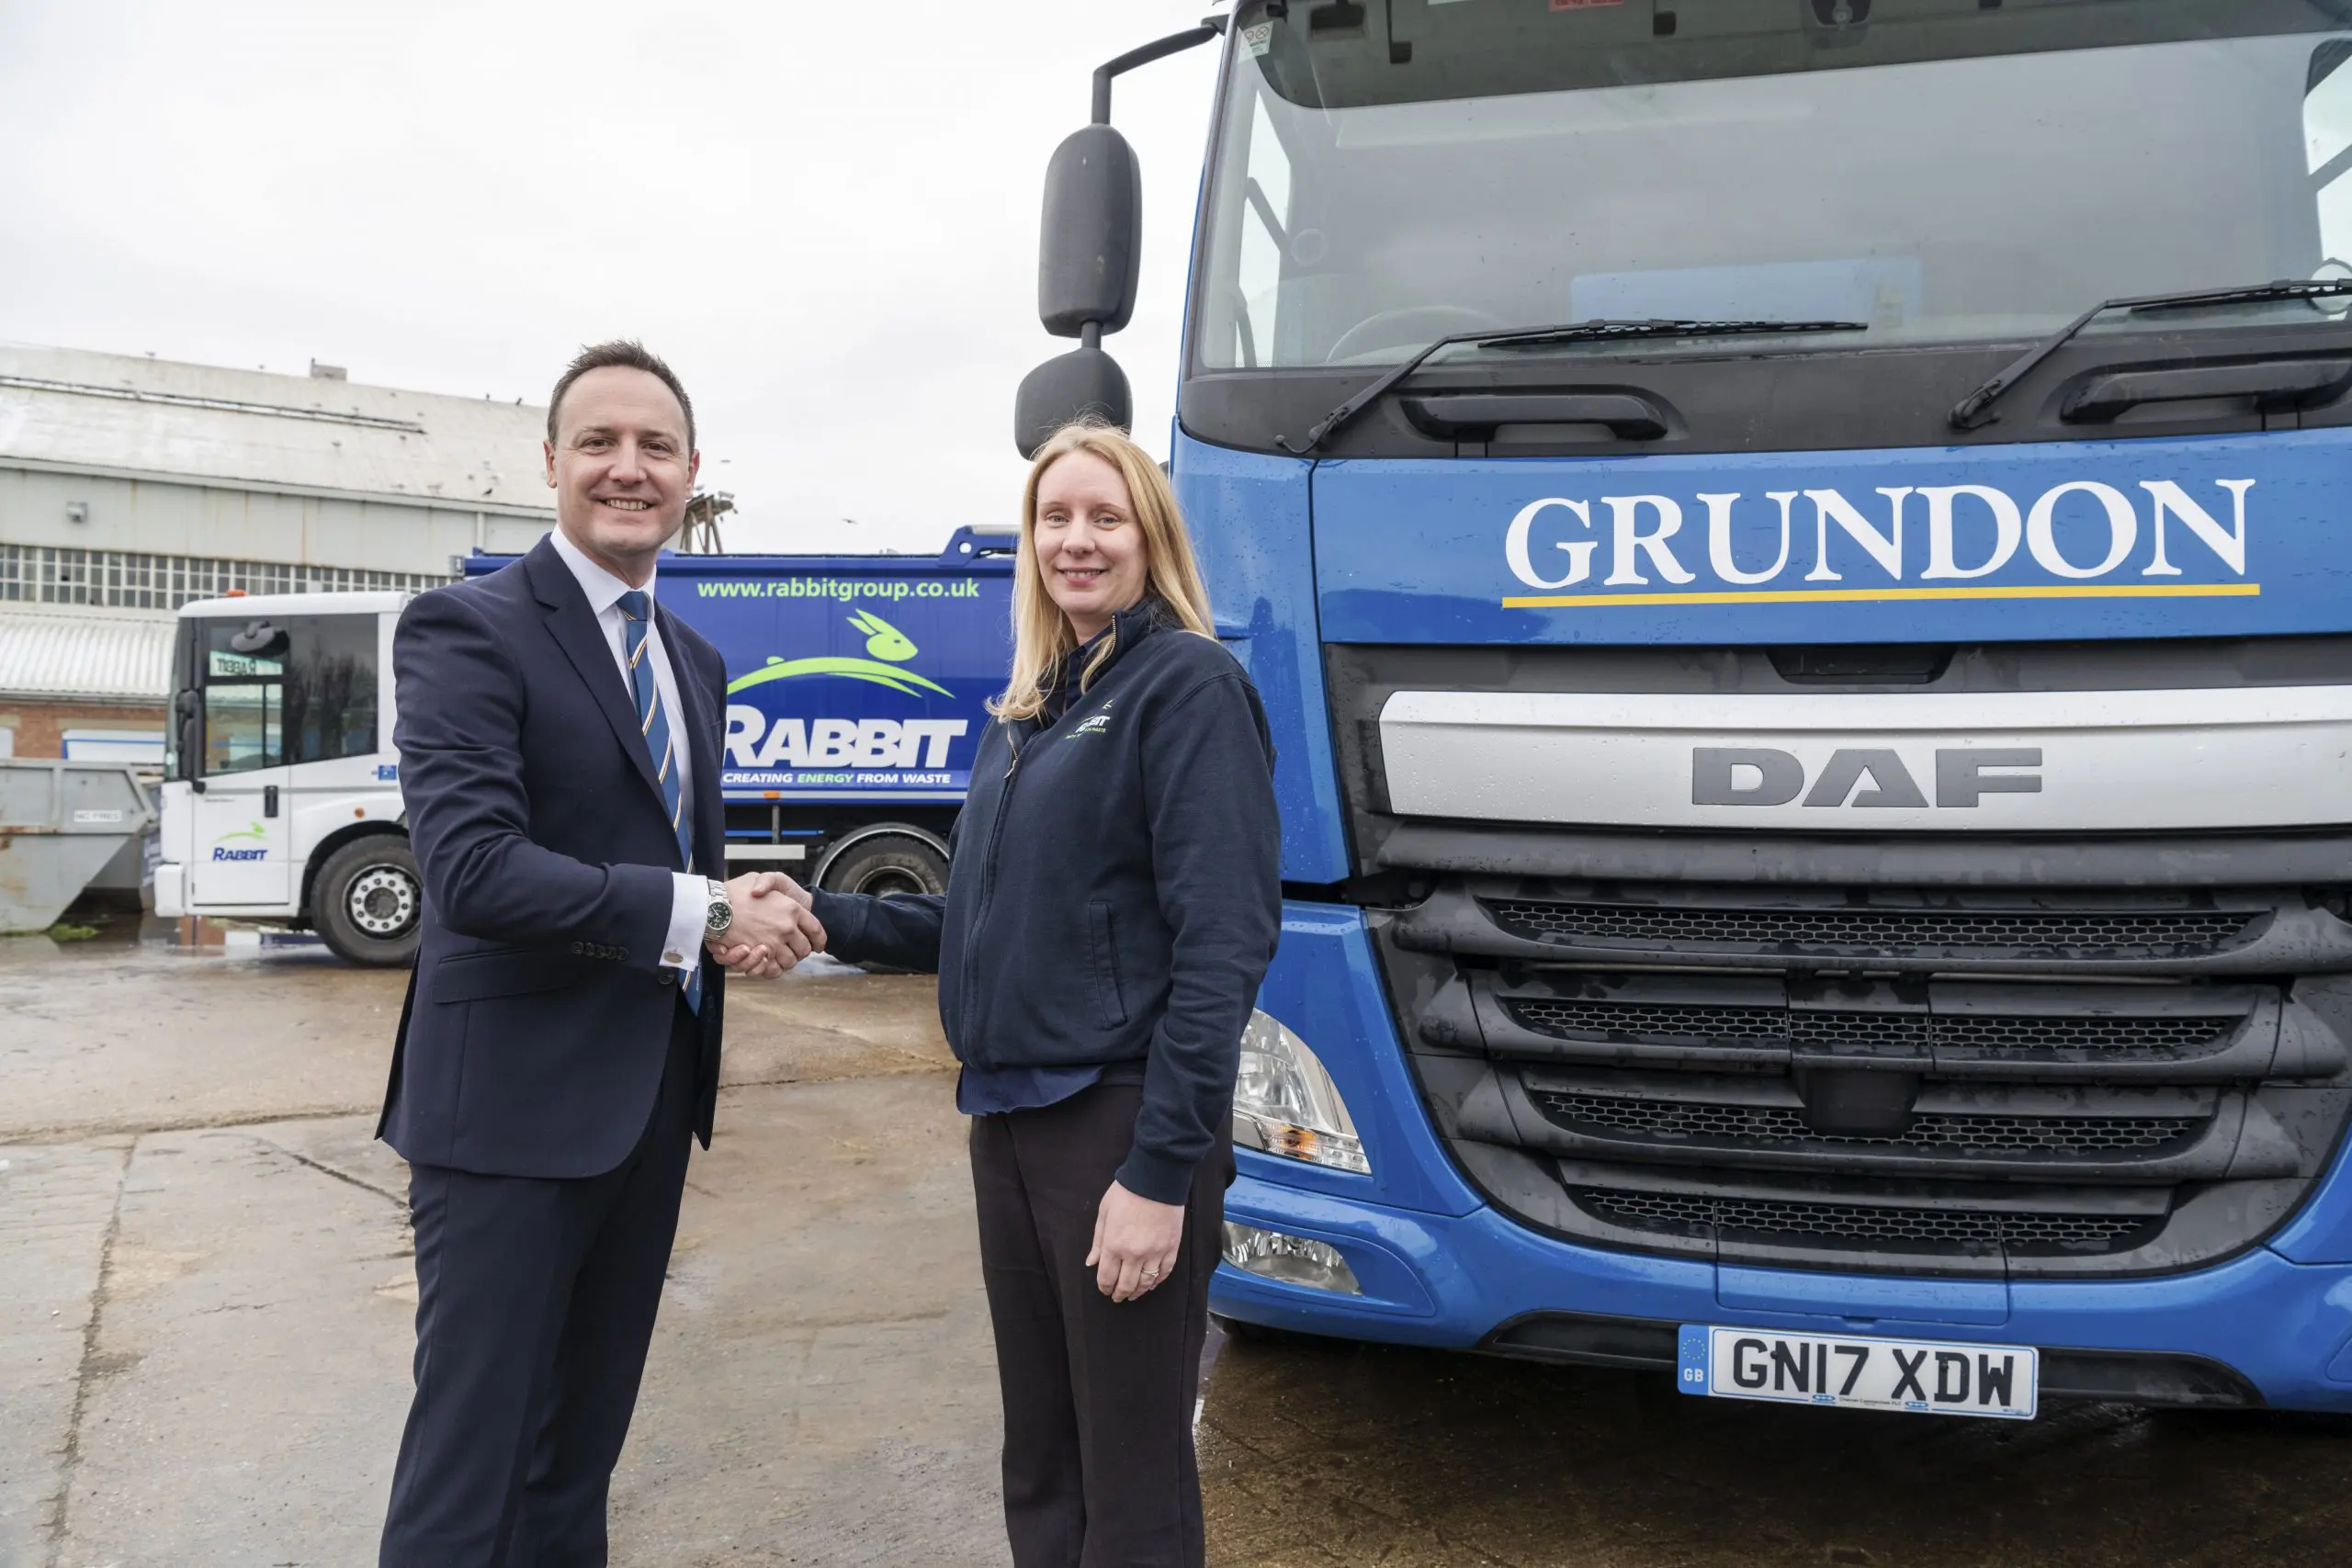 Bradley Smith, Sales & Marketing Director for Grundon pictured with Clare Gale, formerly with Rabbit, who joins the Grundon team as waste management sales.